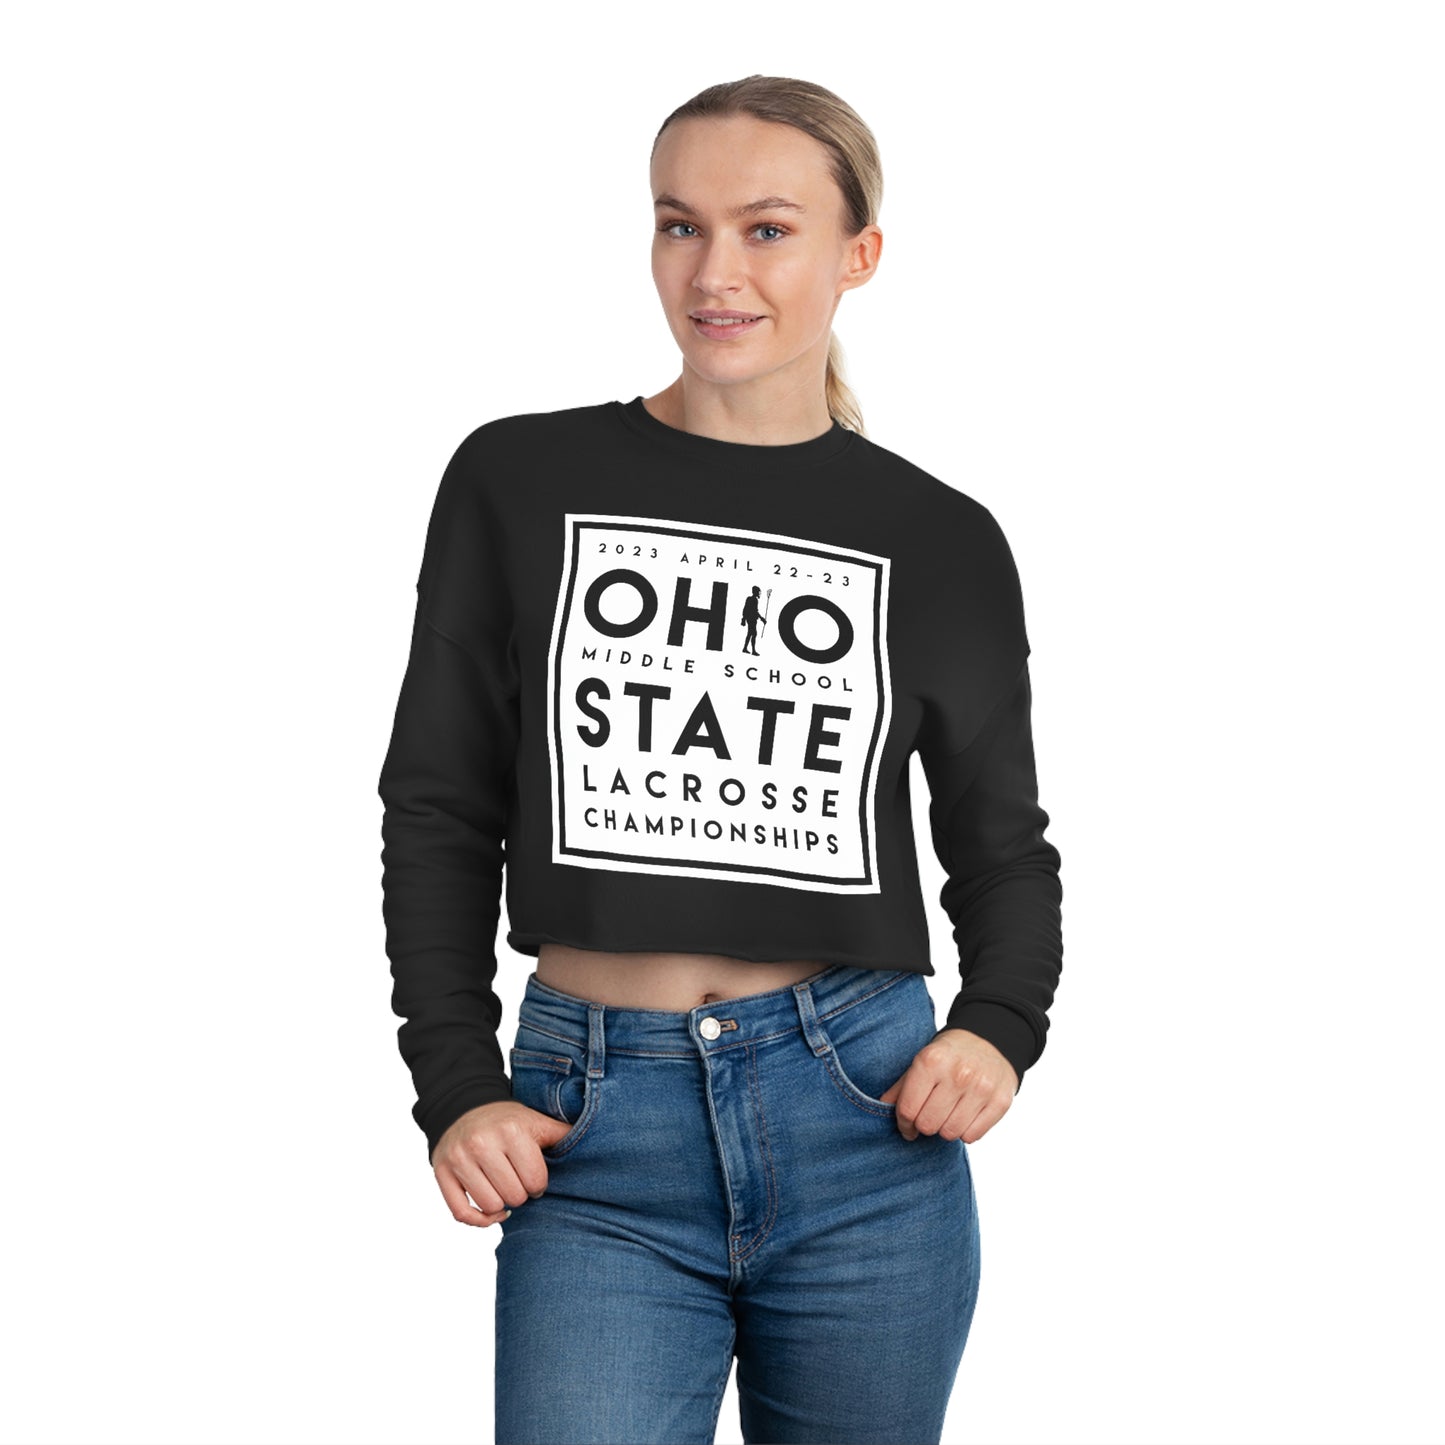 OHIO (PLAYER SUBSTITUTION) STATE LACROSSE CHAMPIONSHIPS-Women's Cropped Sweatshirt